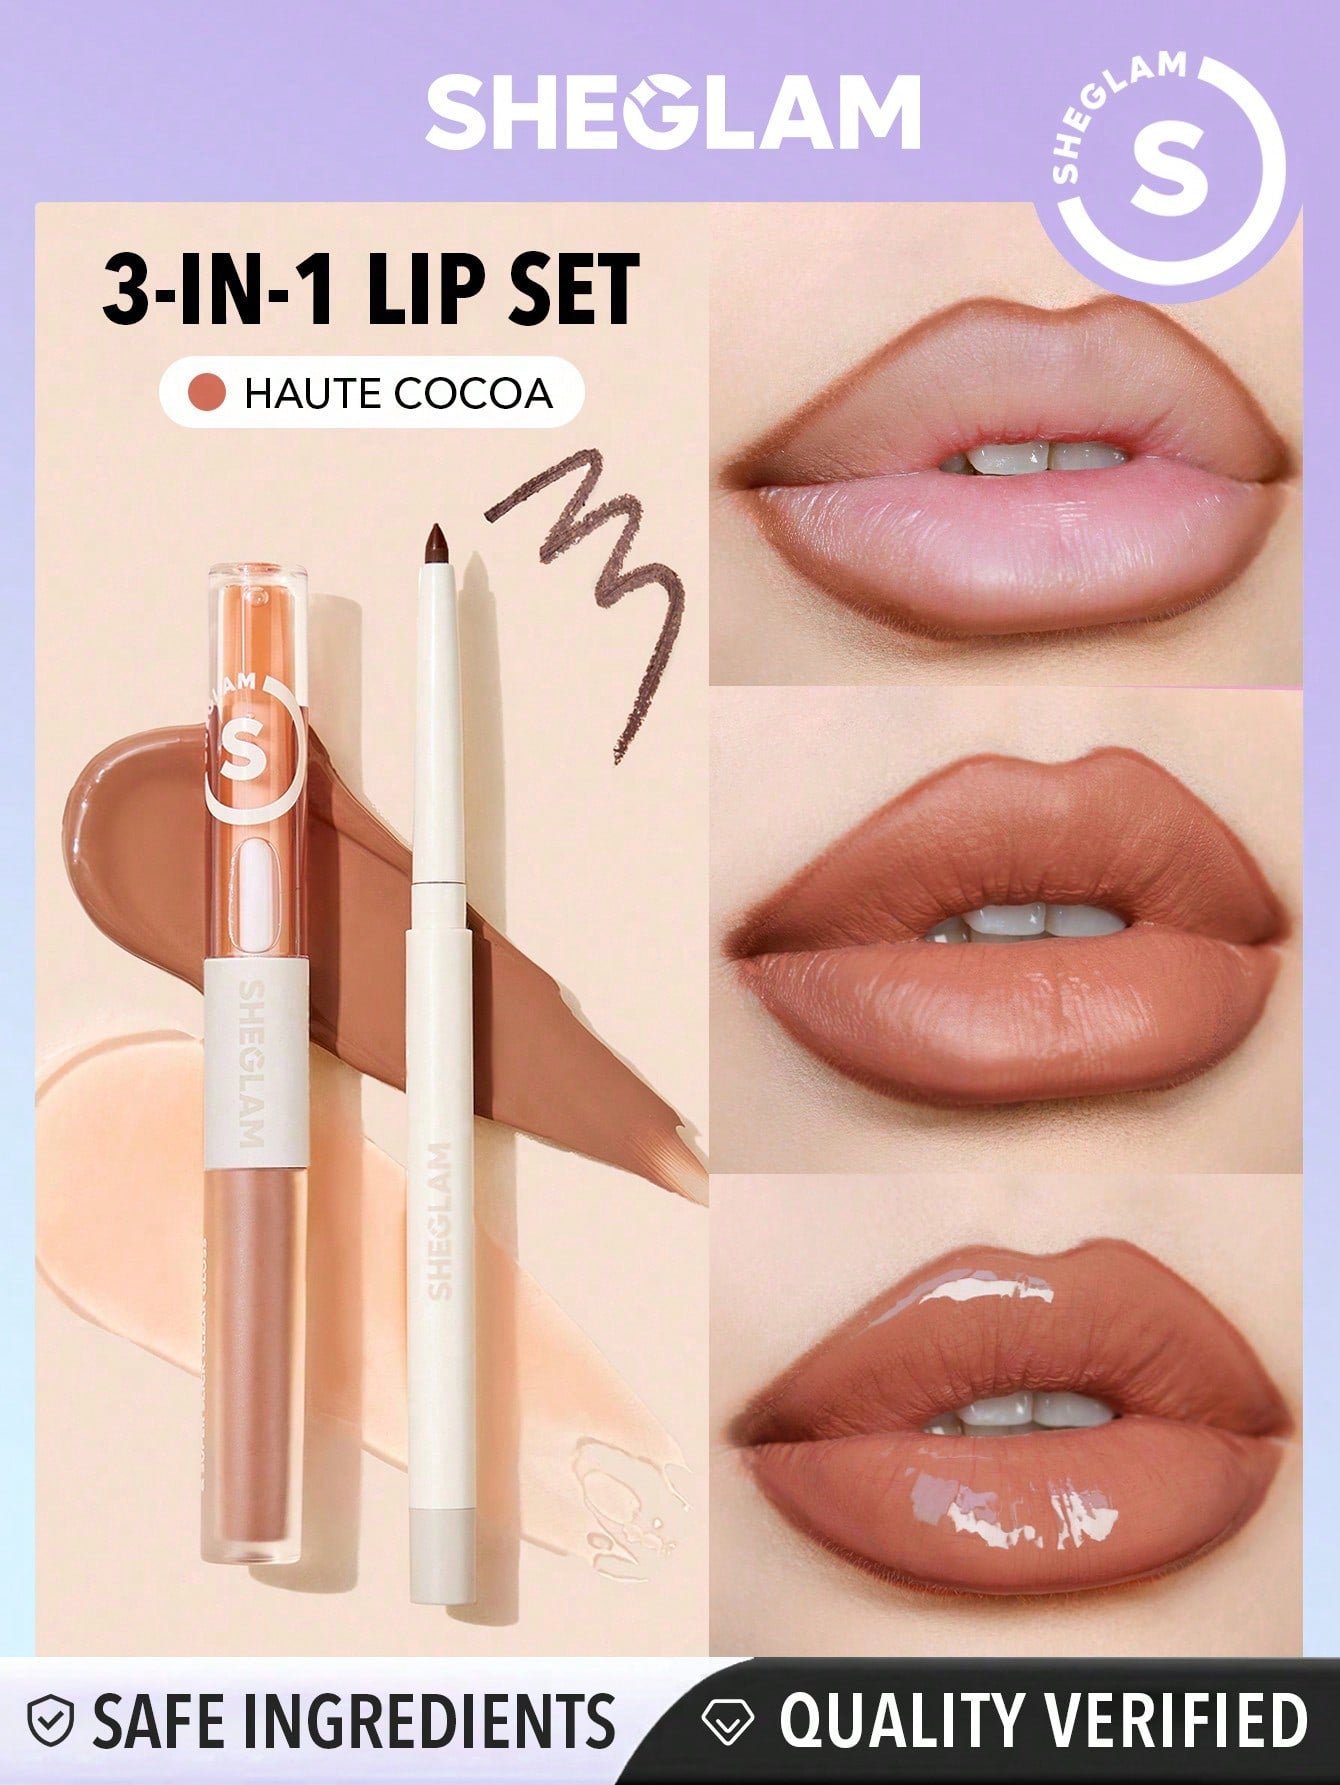 SHEGLAM Soft 90's Glam Lip Liner And Lip Duo Set-Moody Taupe Lip Set 3-In-1 Lip Makeup Plumping Lip Gloss Moisturizing Plant Extracts Long Lasting Liquid Lipstick - Negative Apparel